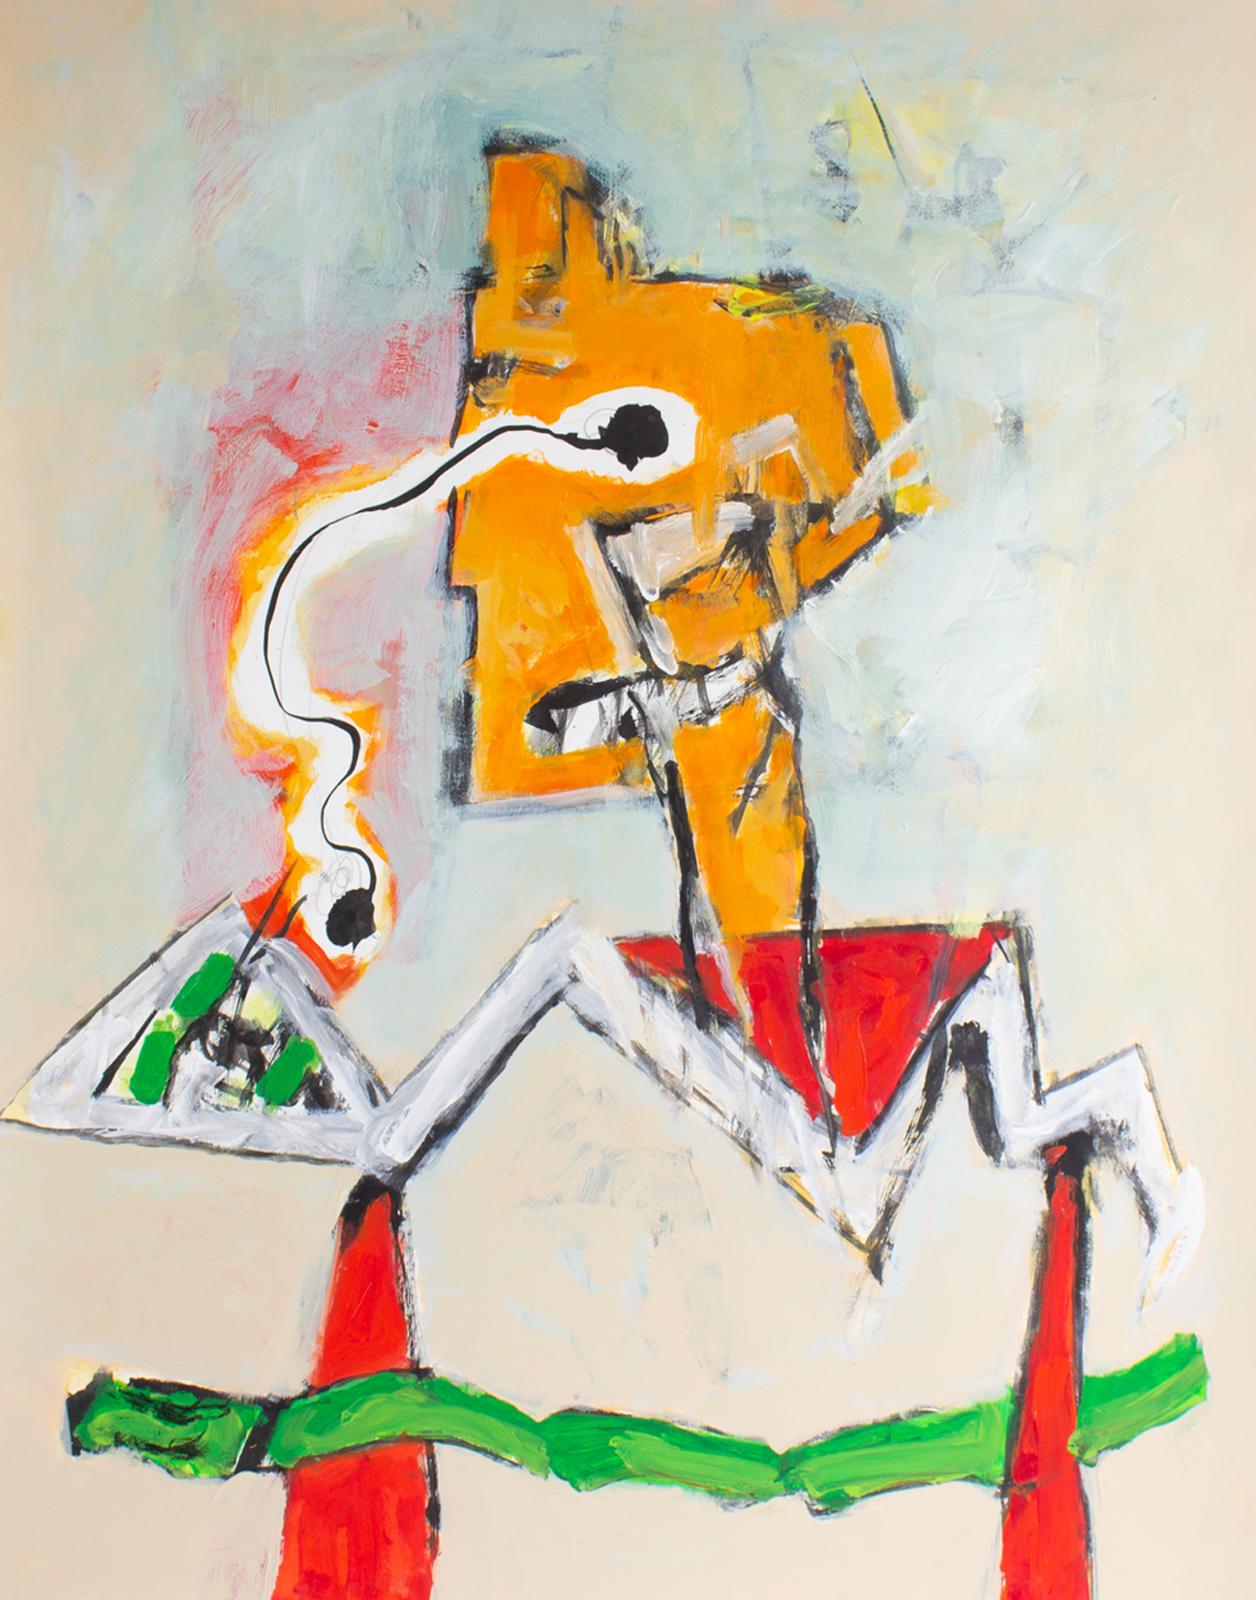 An acrylic and watercolor on paper painting by the American artist James L. Bruch (1942-2023). This colorful work depicts an abstract figure with orange head and red and green body formed from geometric shapes. Unsigned, the work is estate stamped